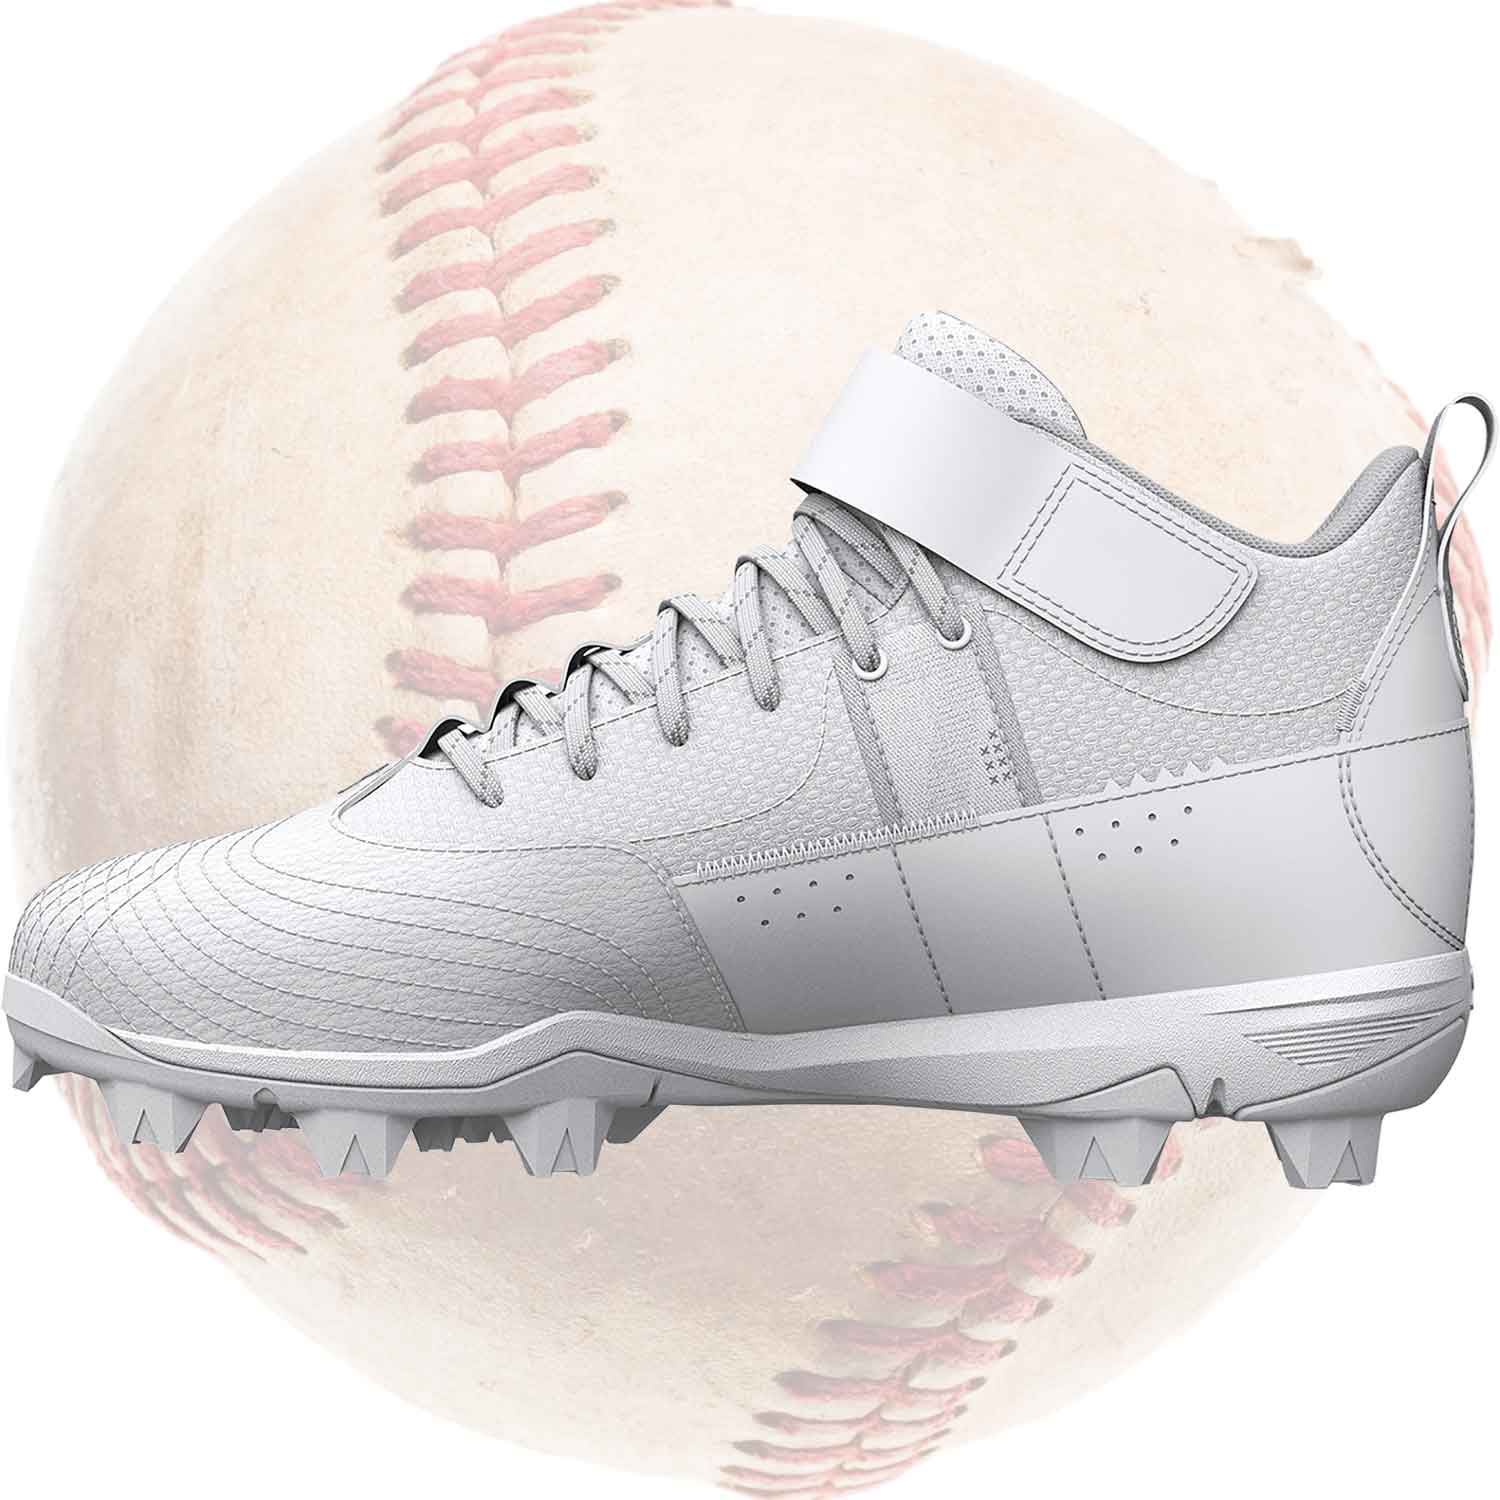 Under Armour Harper 7 Mens Baseball Cleats - Lateral Supportive Velcro Strap